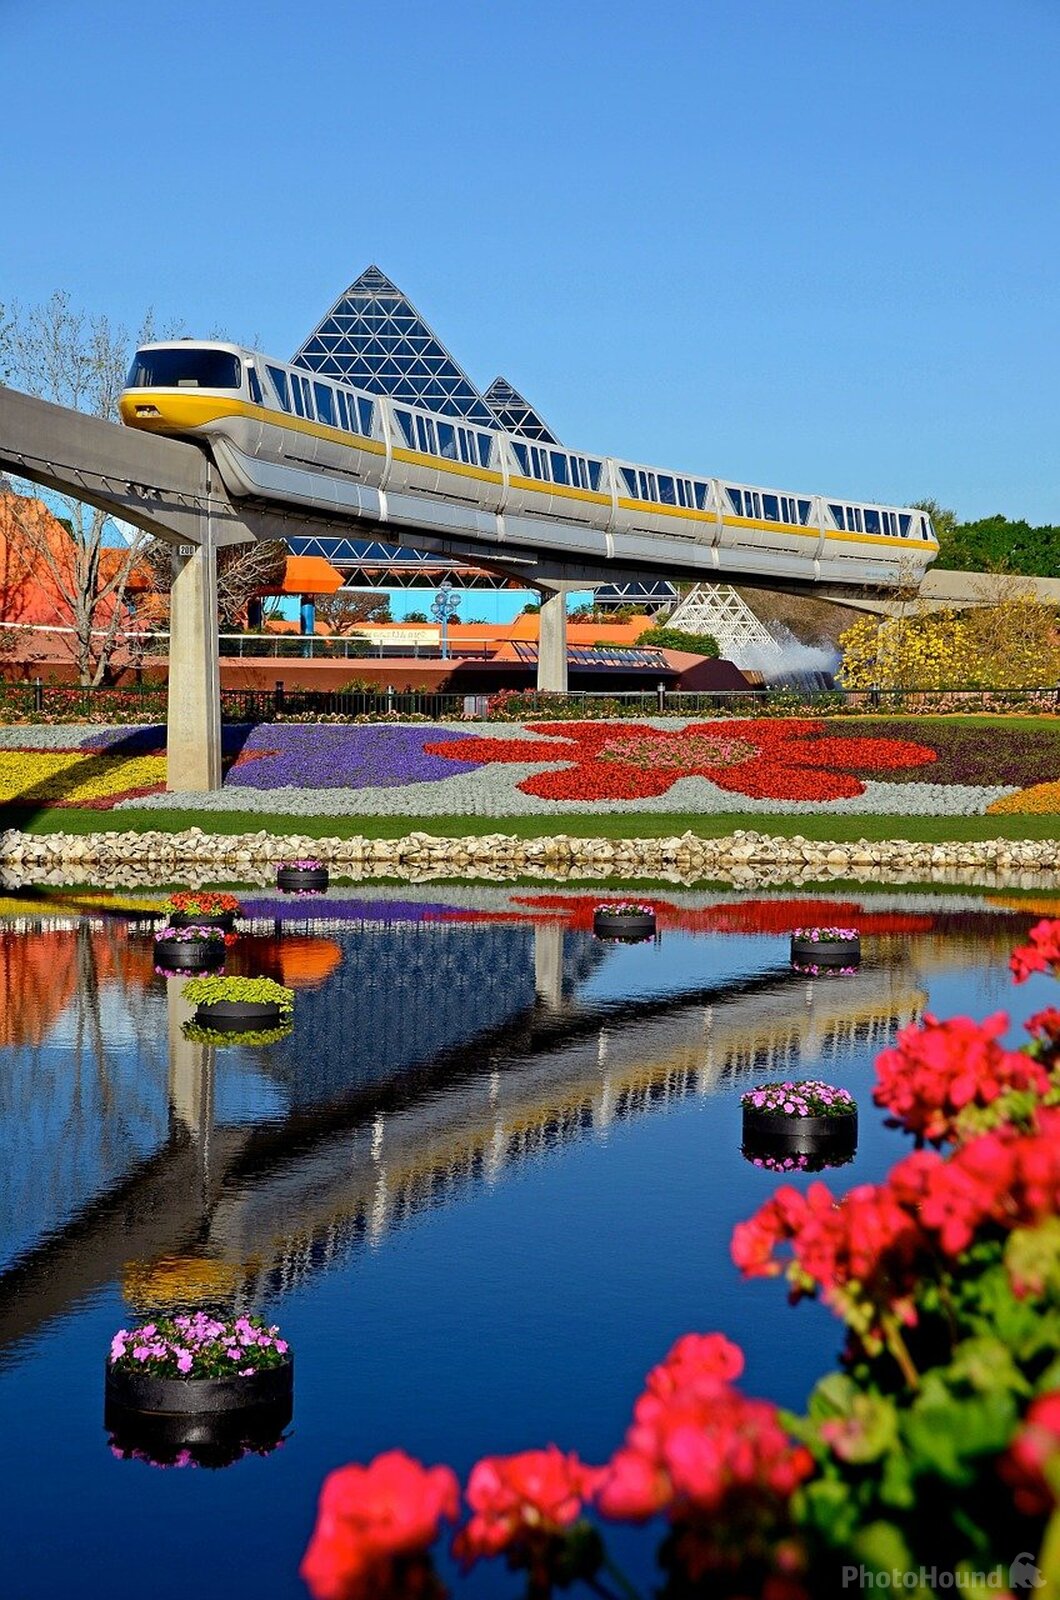 Image of Epcot by Team PhotoHound